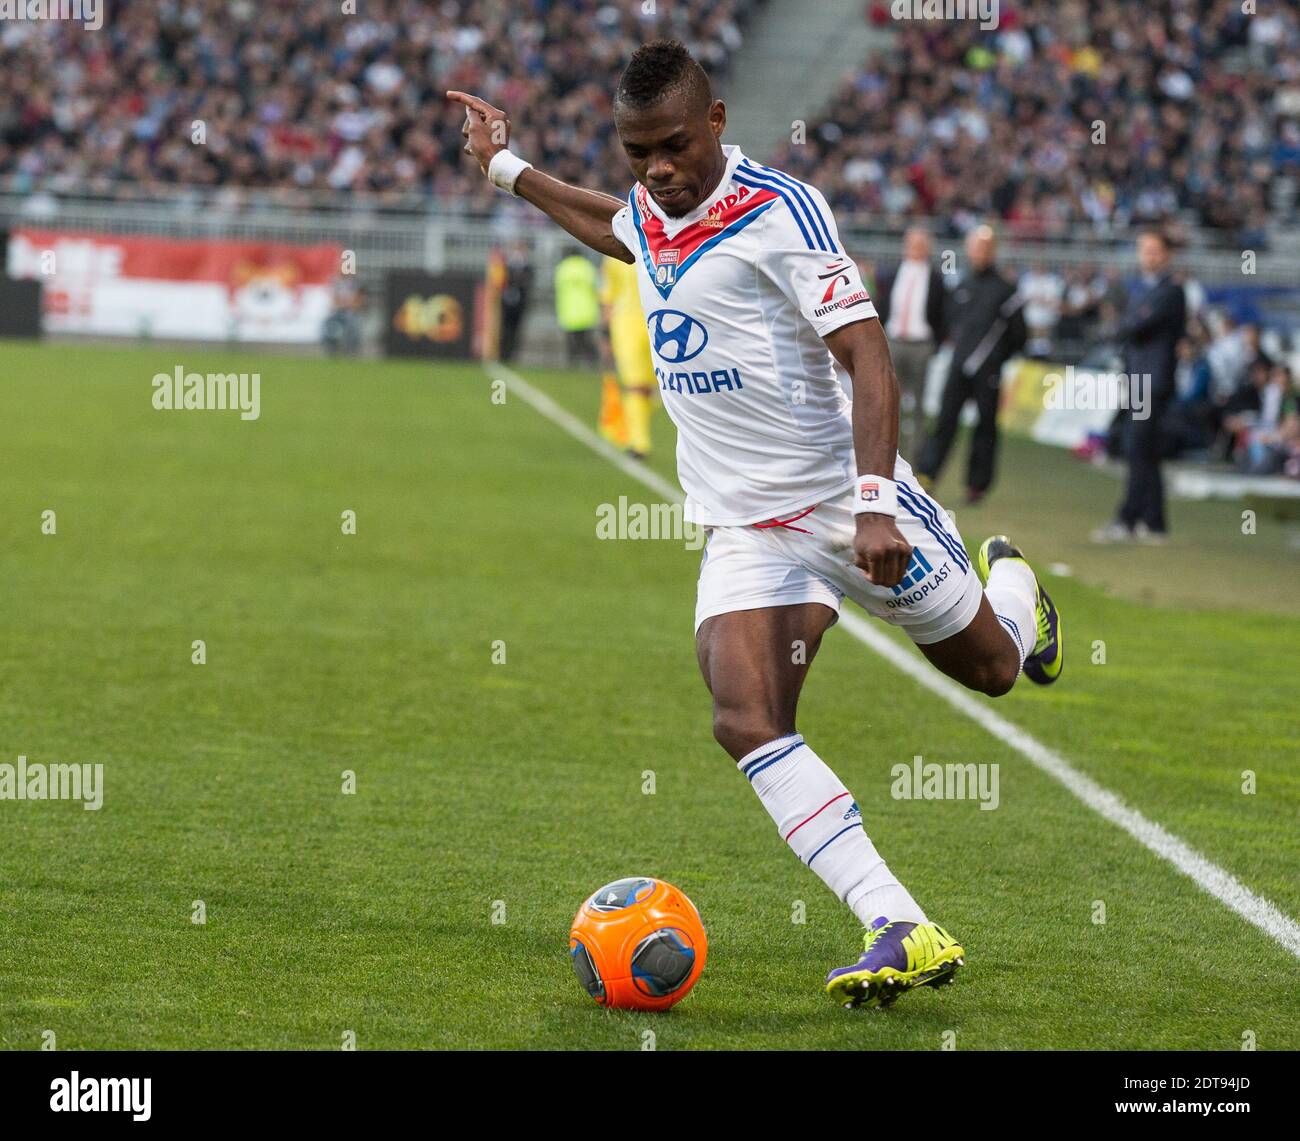 OL' s Henri Bedimo during the French First League soccer match, Olympique de Lyon Vs AS Monaco at the Gerland Stadium in Lyon France on March 16, 2014 . ASM won 3-1. Photo by Vincent Dargent/ABACAPRESS.COM Stock Photo